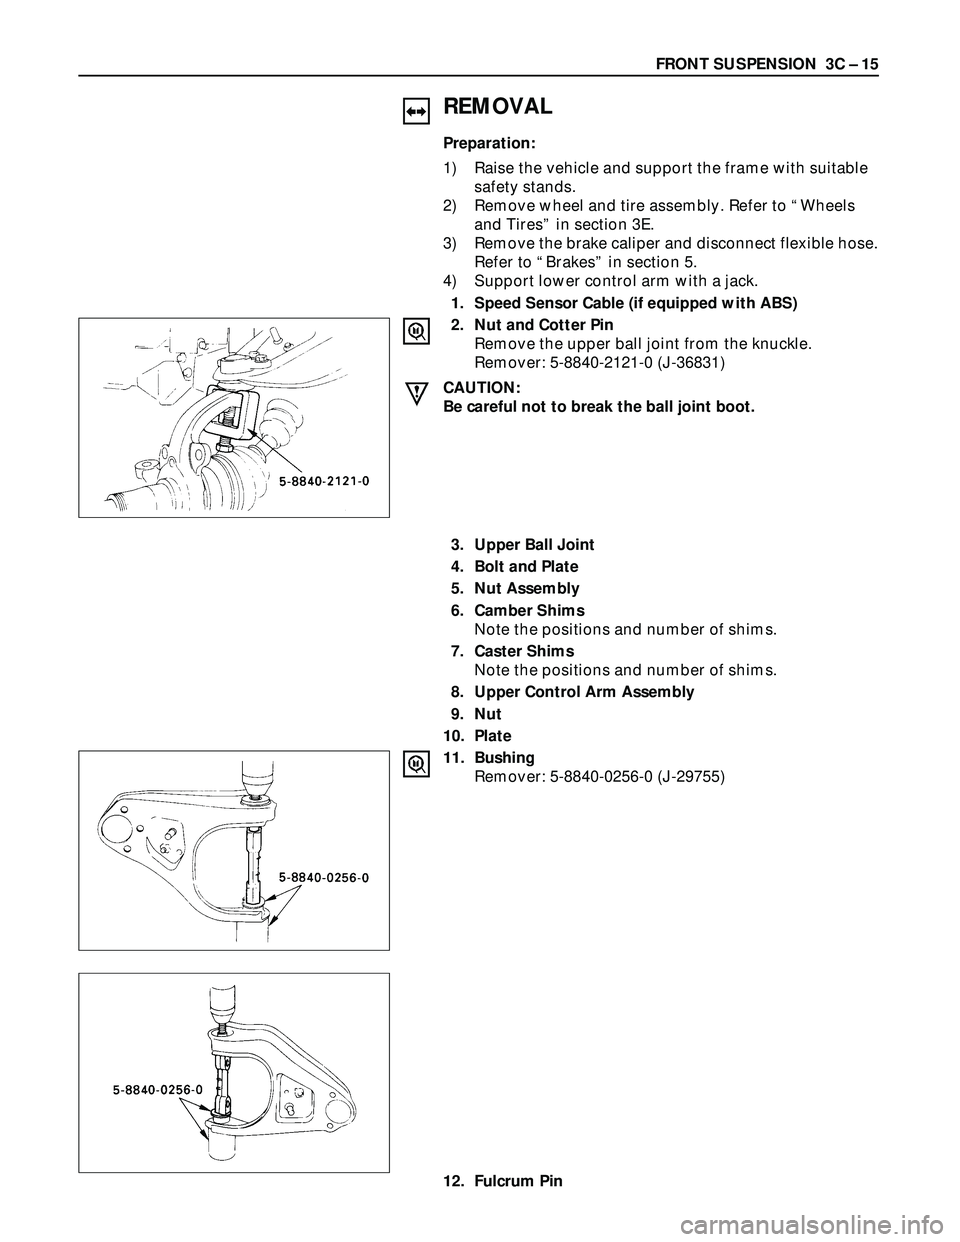 ISUZU TROOPER 1998  Service User Guide FRONT SUSPENSION  3C – 15
REMOVAL
Preparation:
1) Raise the vehicle and support the frame with suitable
safety stands.
2) Remove wheel and tire assembly. Refer to “Wheels
and Tires” in section 3